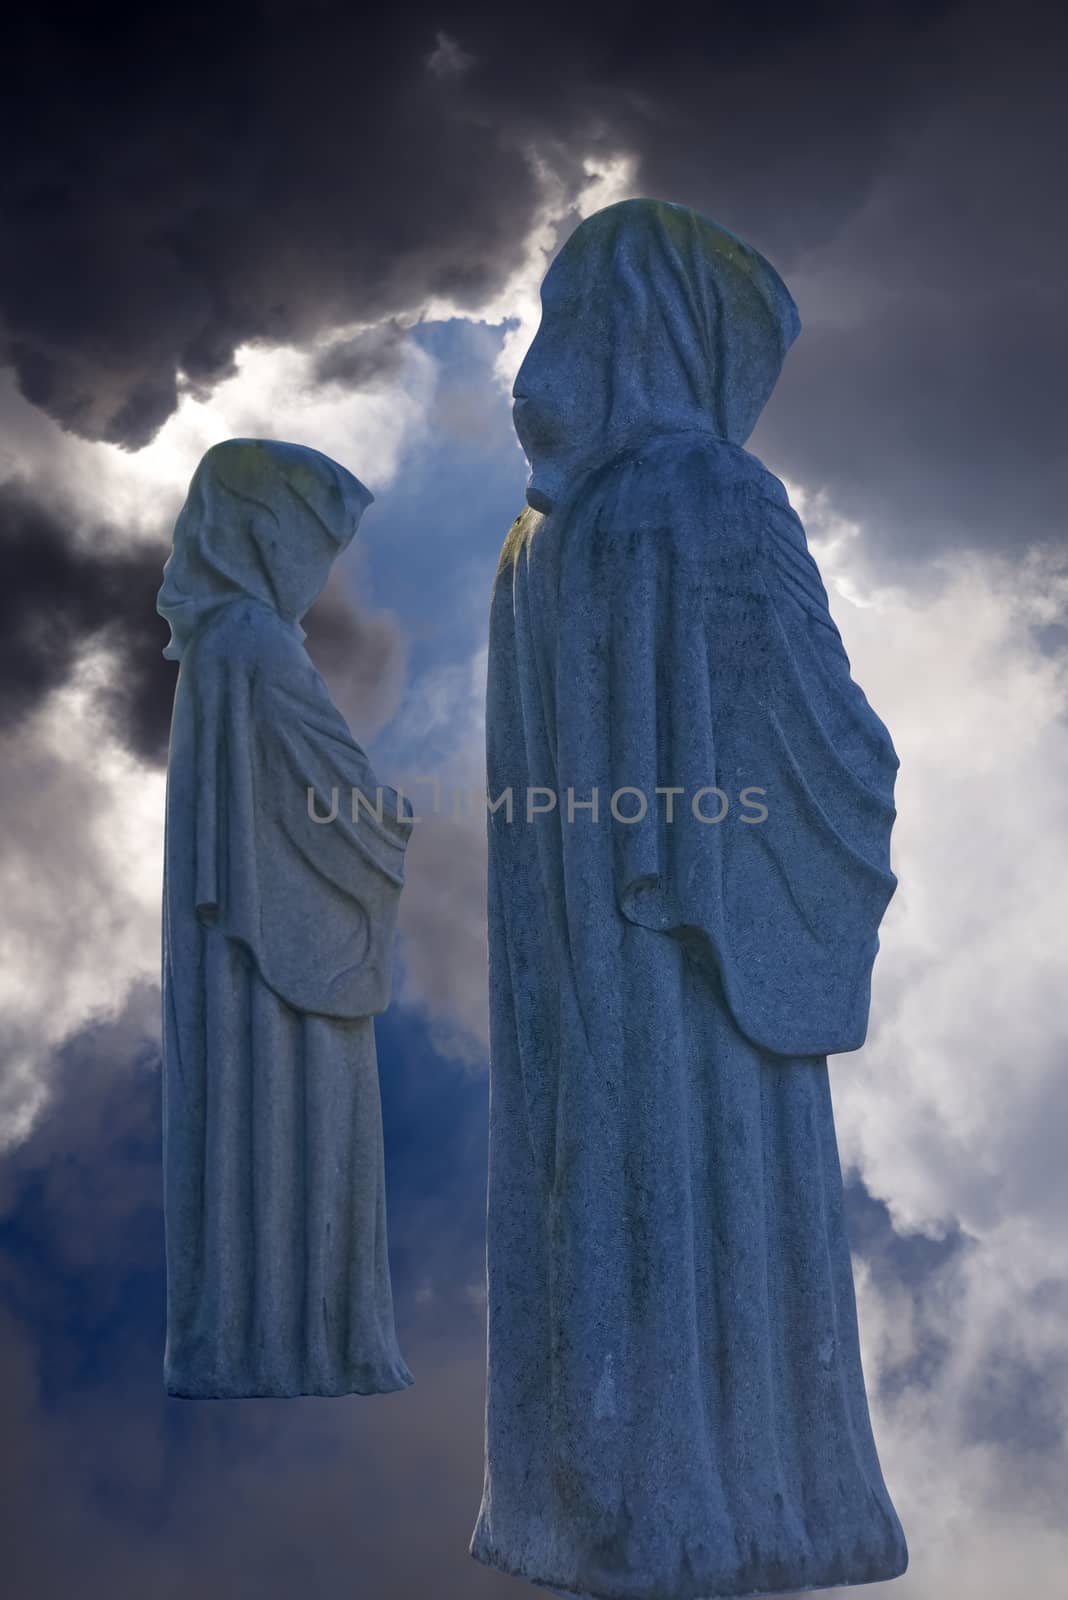 two faceless monk statues against dark skies by morrbyte